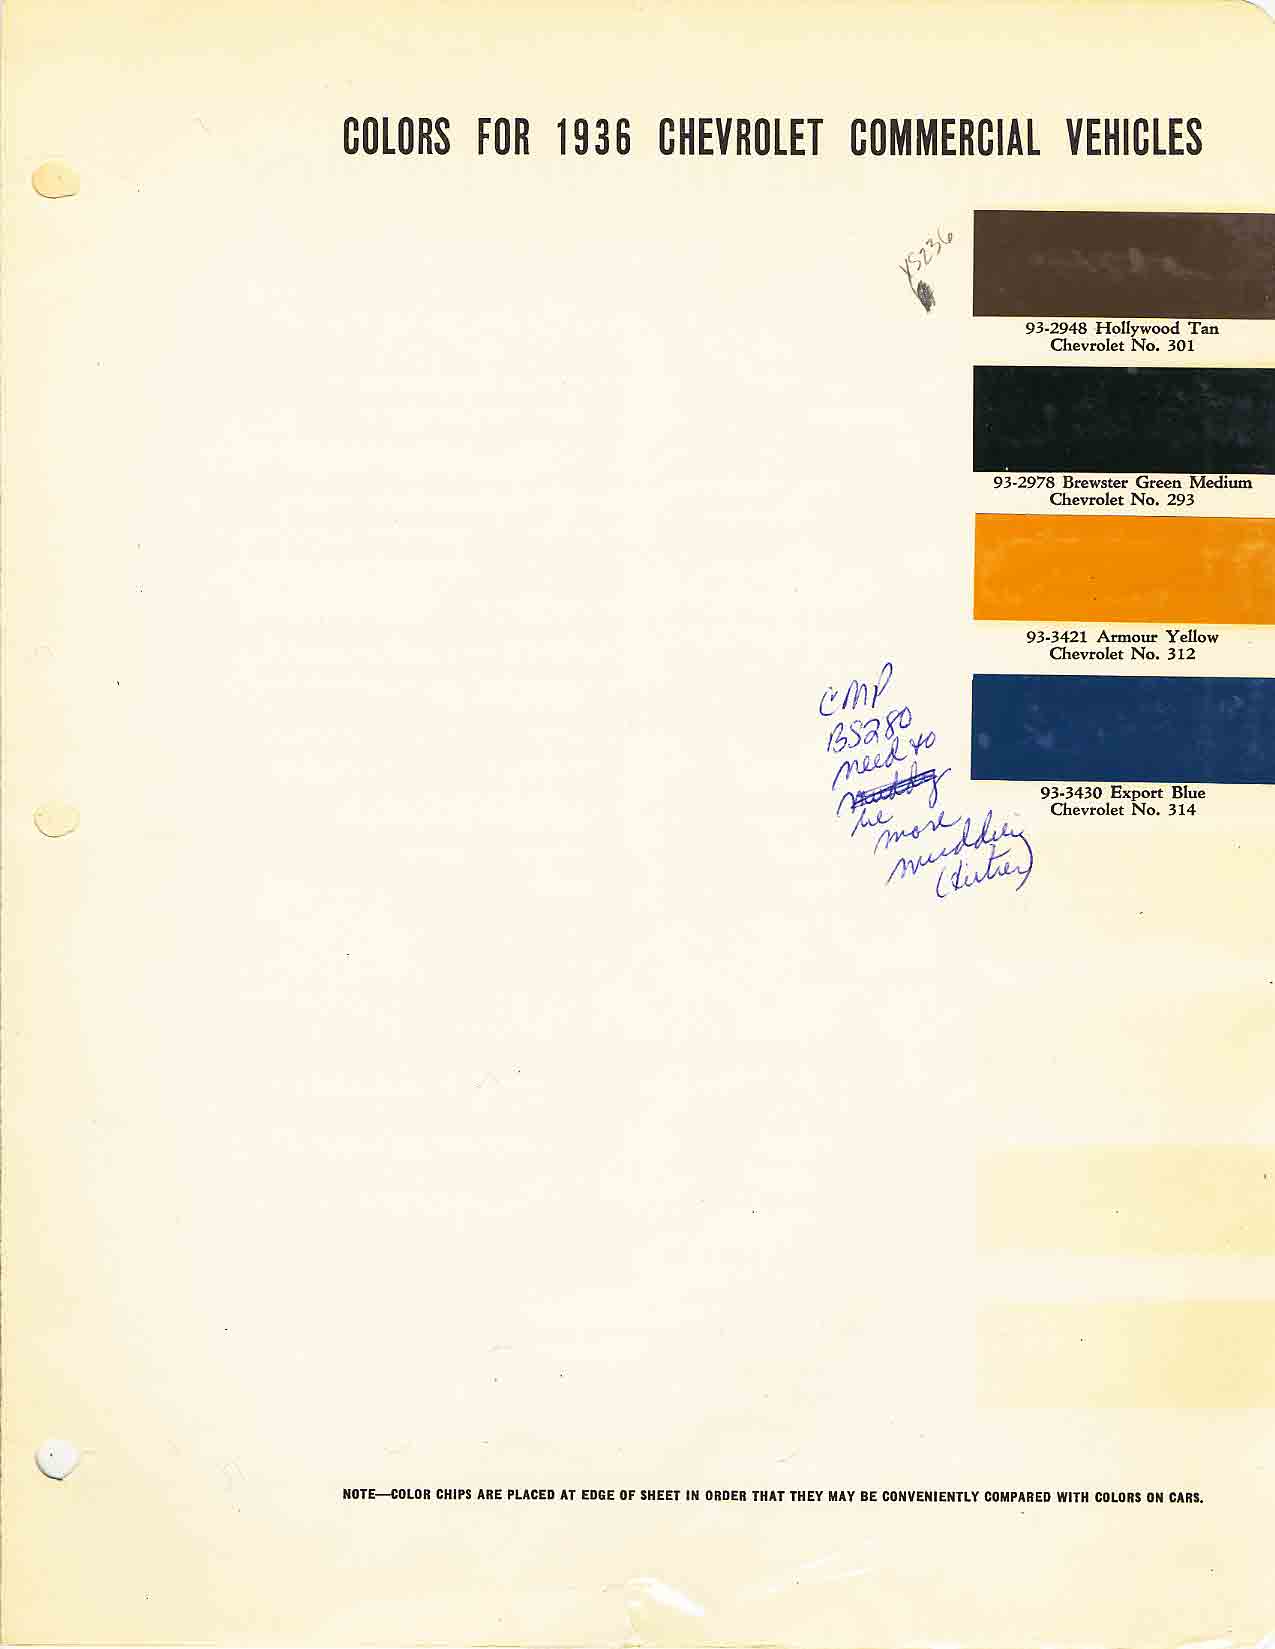 Exterior Color and Codes used on 1936 Chevrolet Vehicles